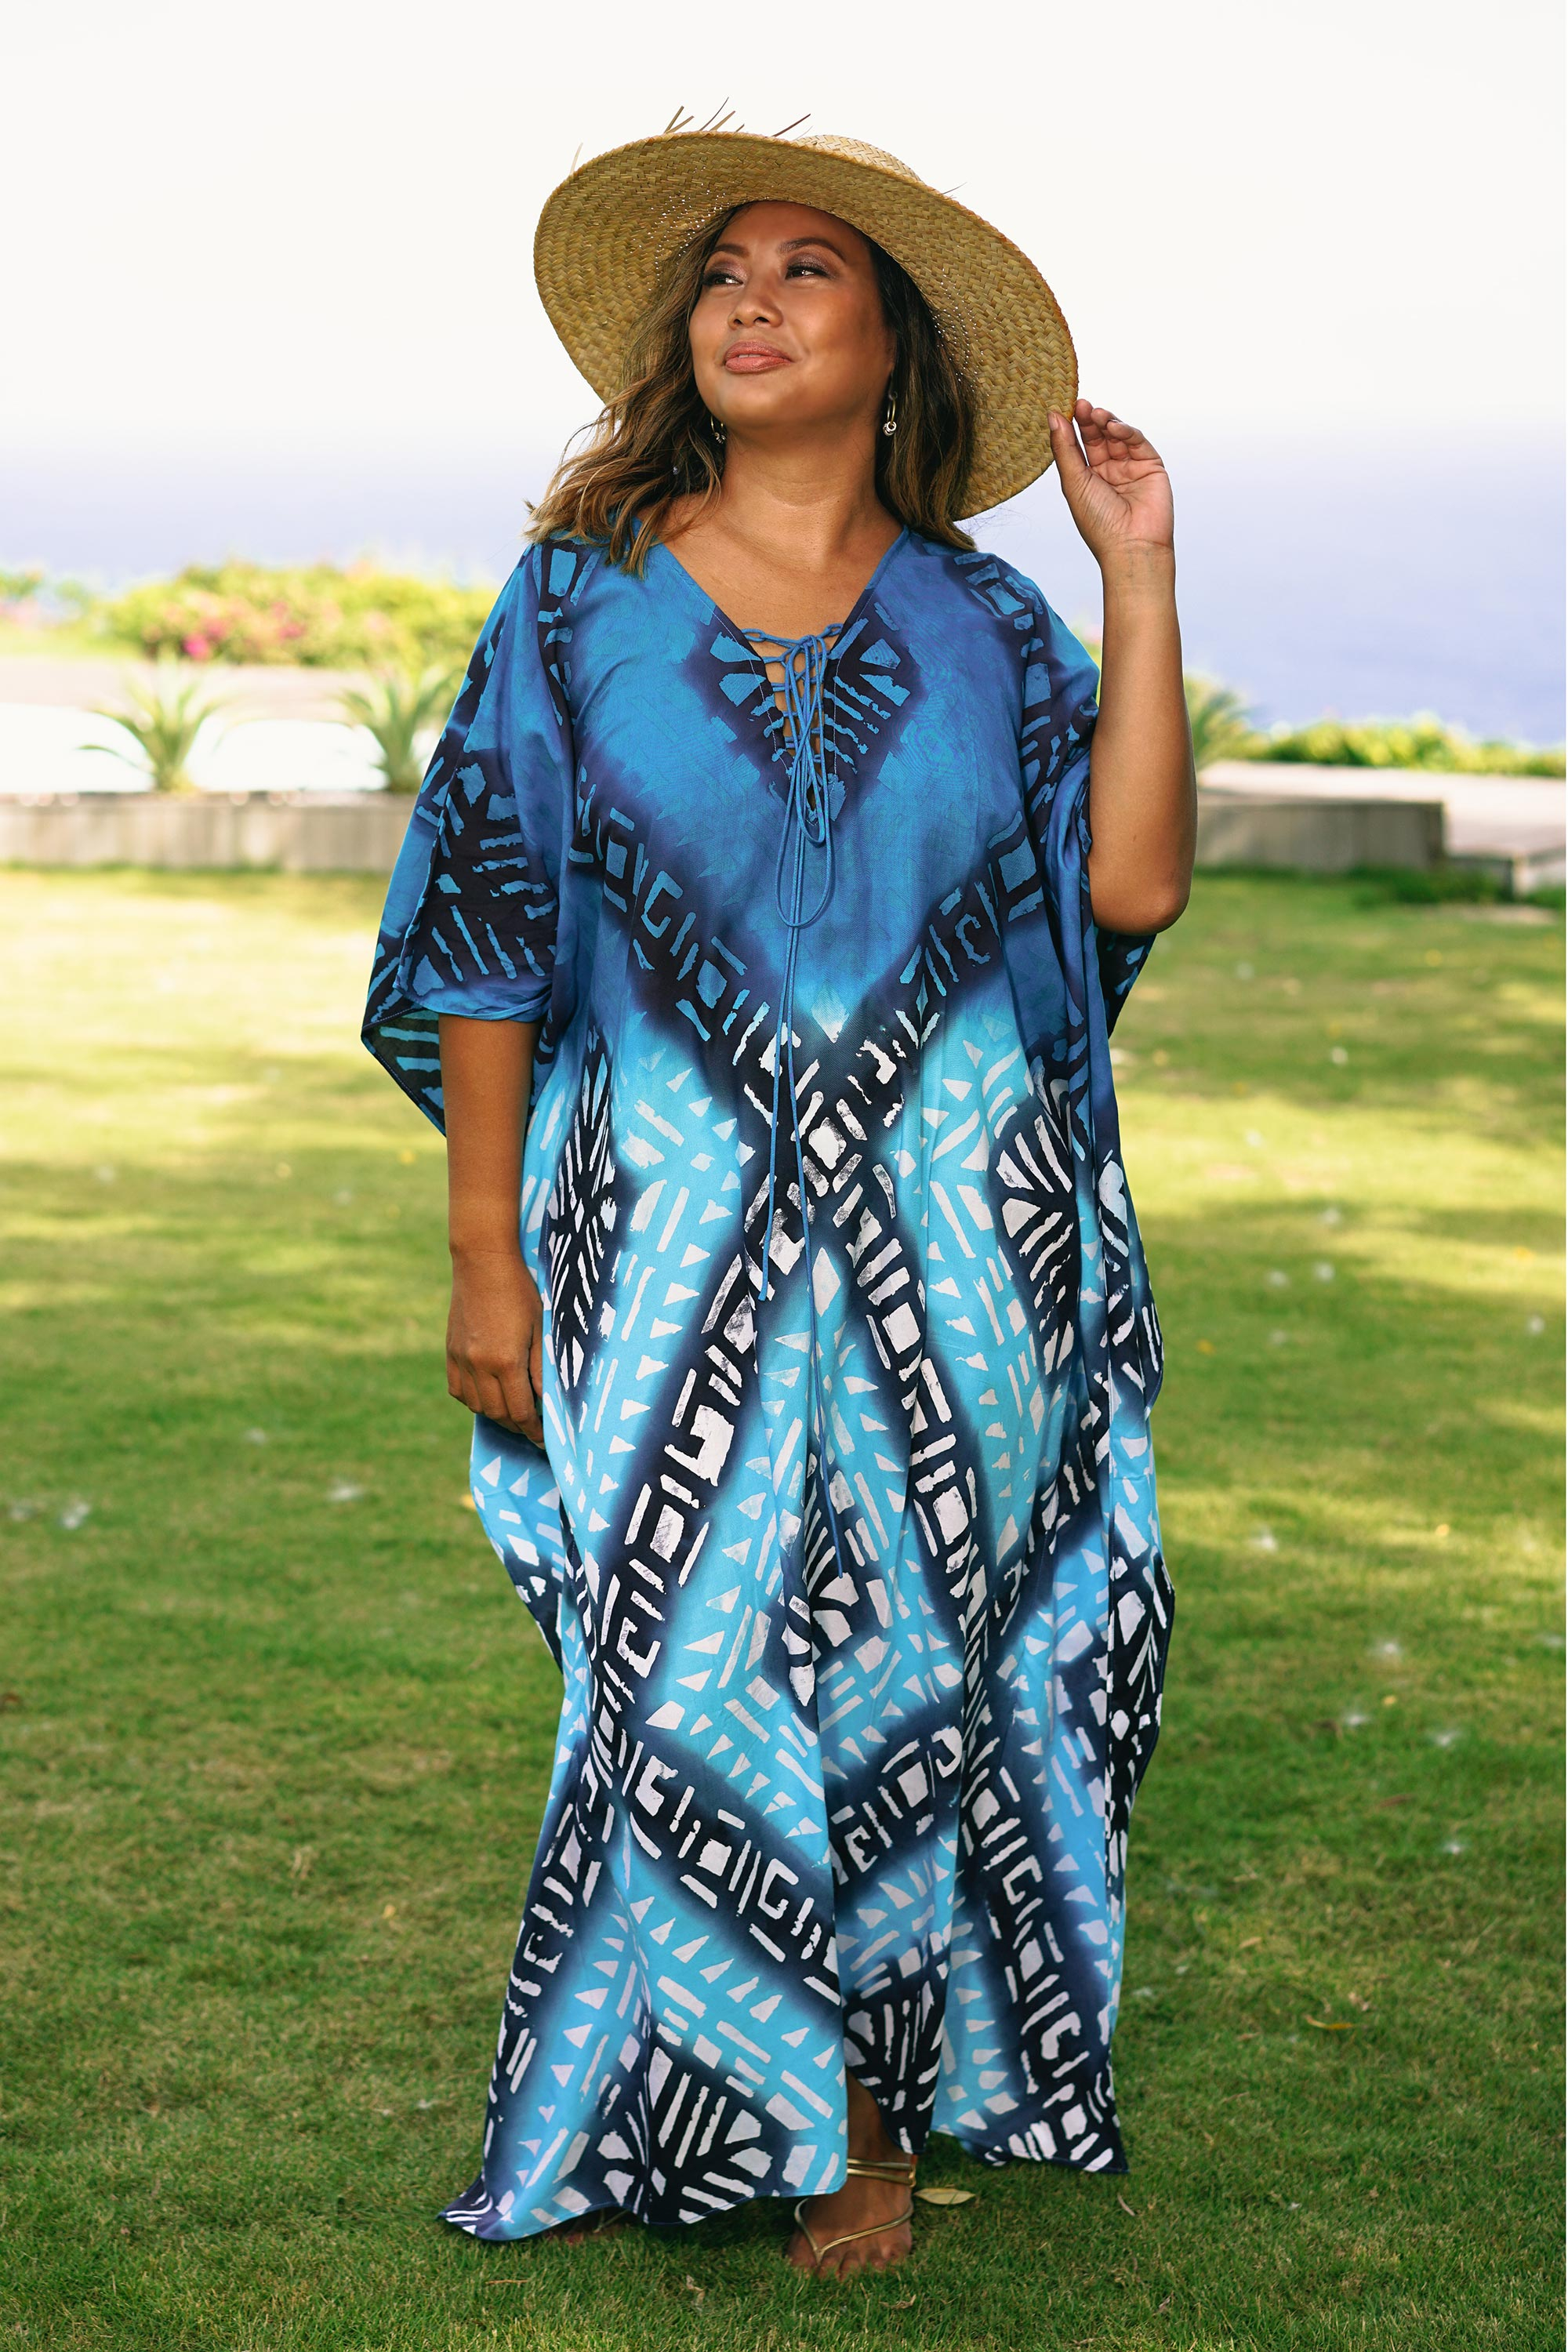 Ladies Kaftan/Poncho Beach wear one Size Tunic Top fits Large Plus Size Purple Abstract Pattern